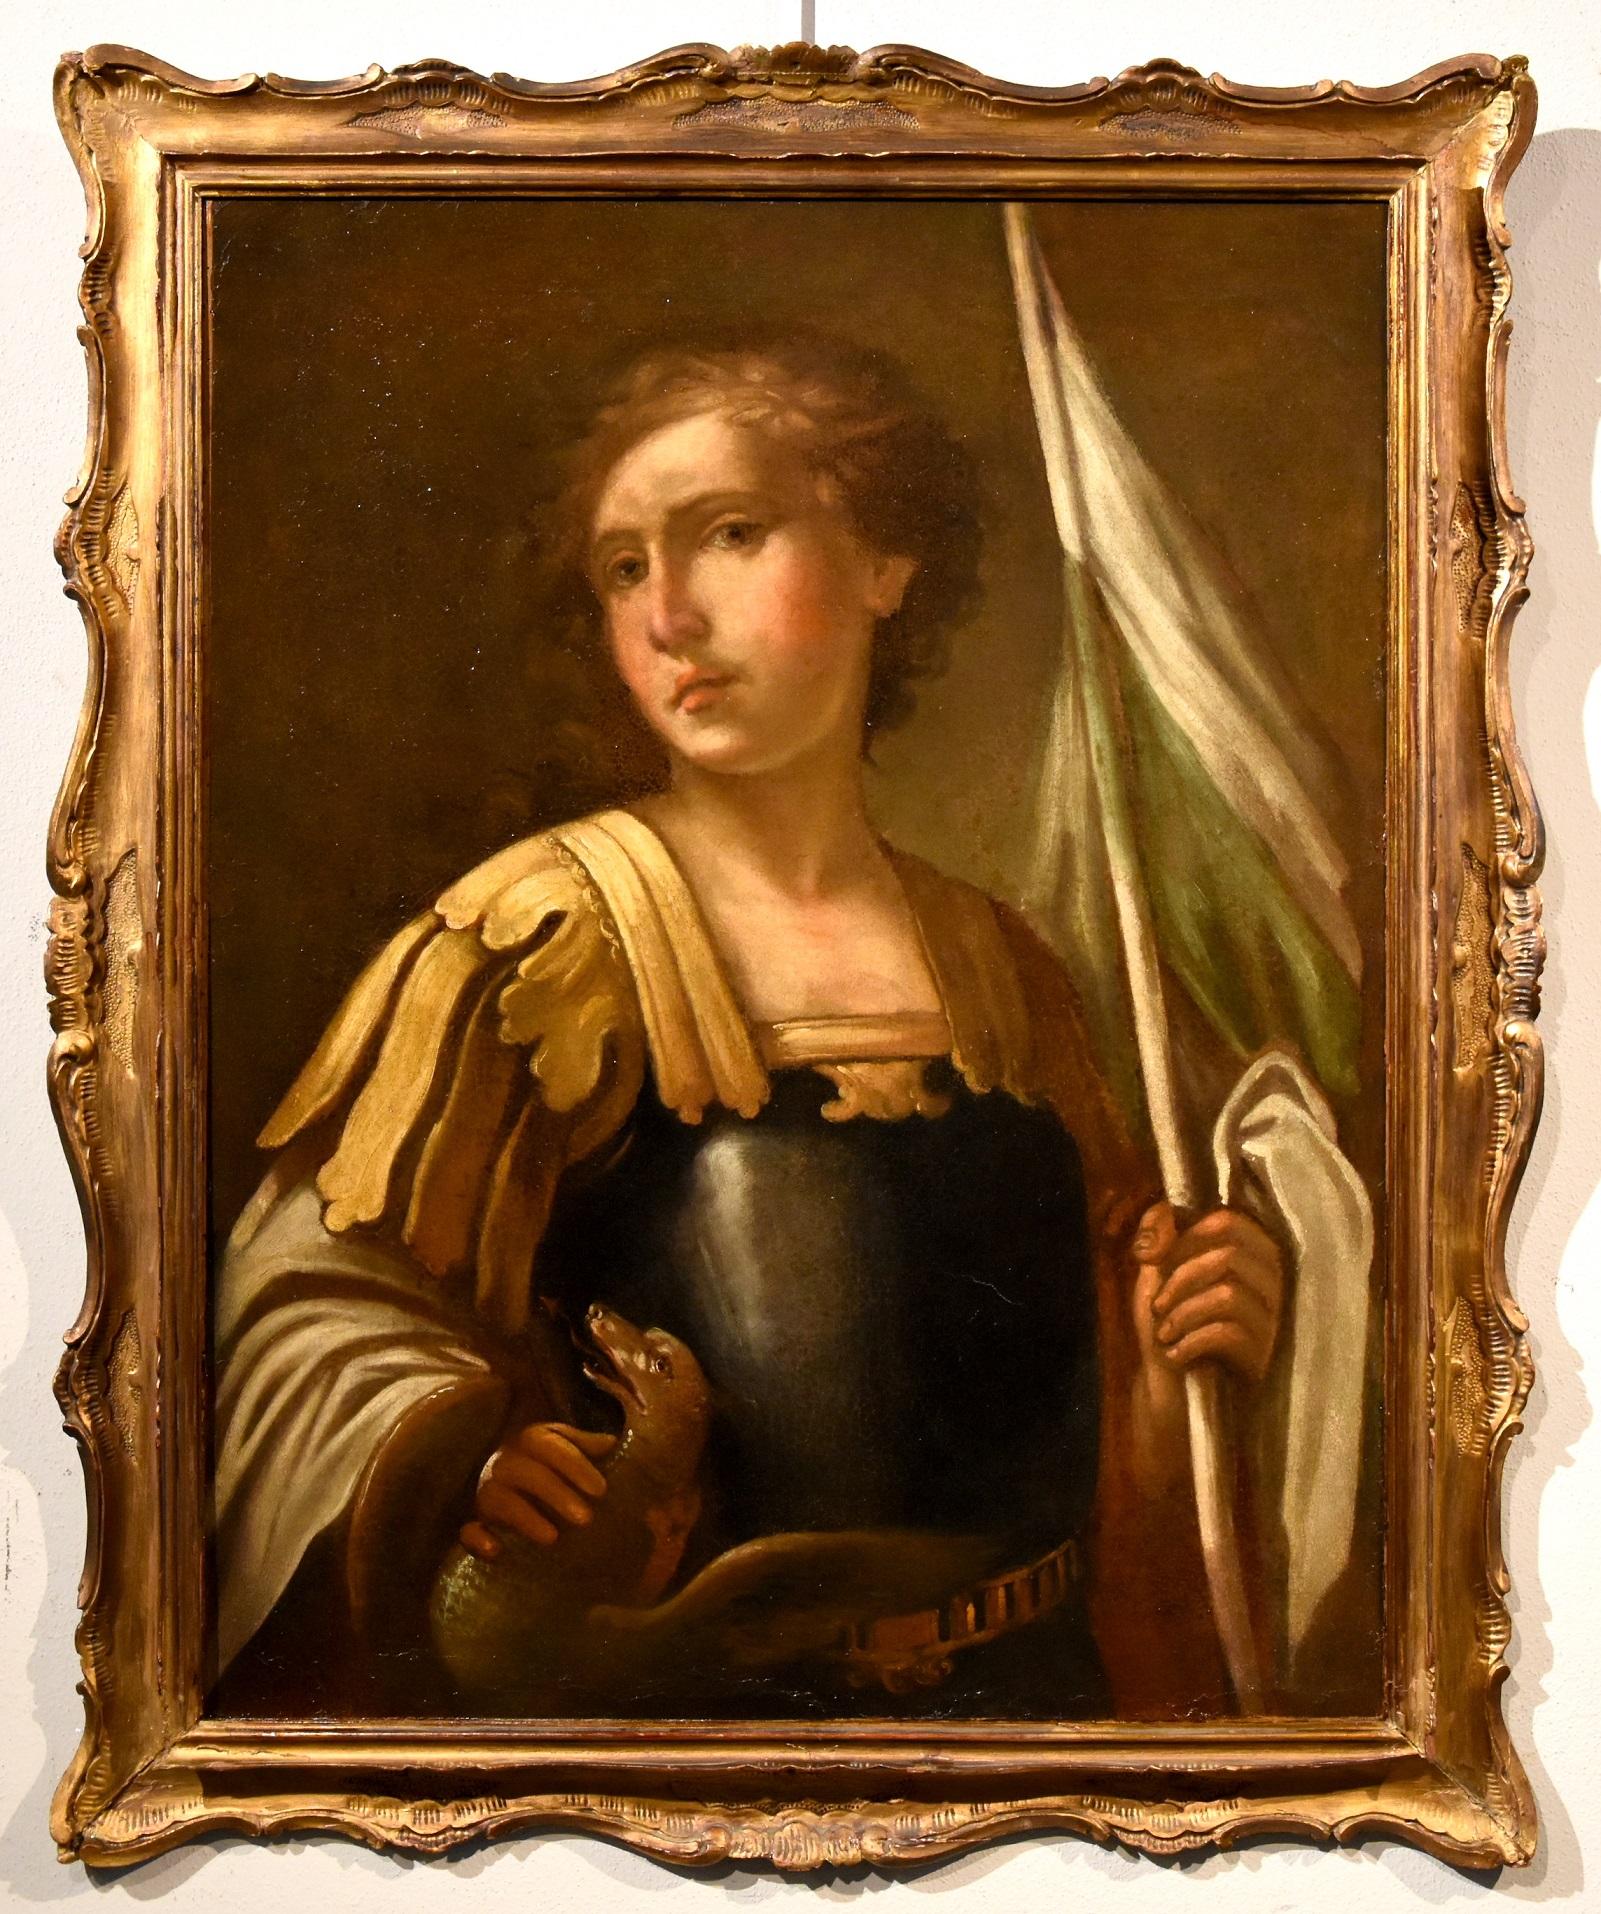 Portrait Saint George Paint Oil on canvas Old master 17th CEntury Italian Art - Painting by Unknown